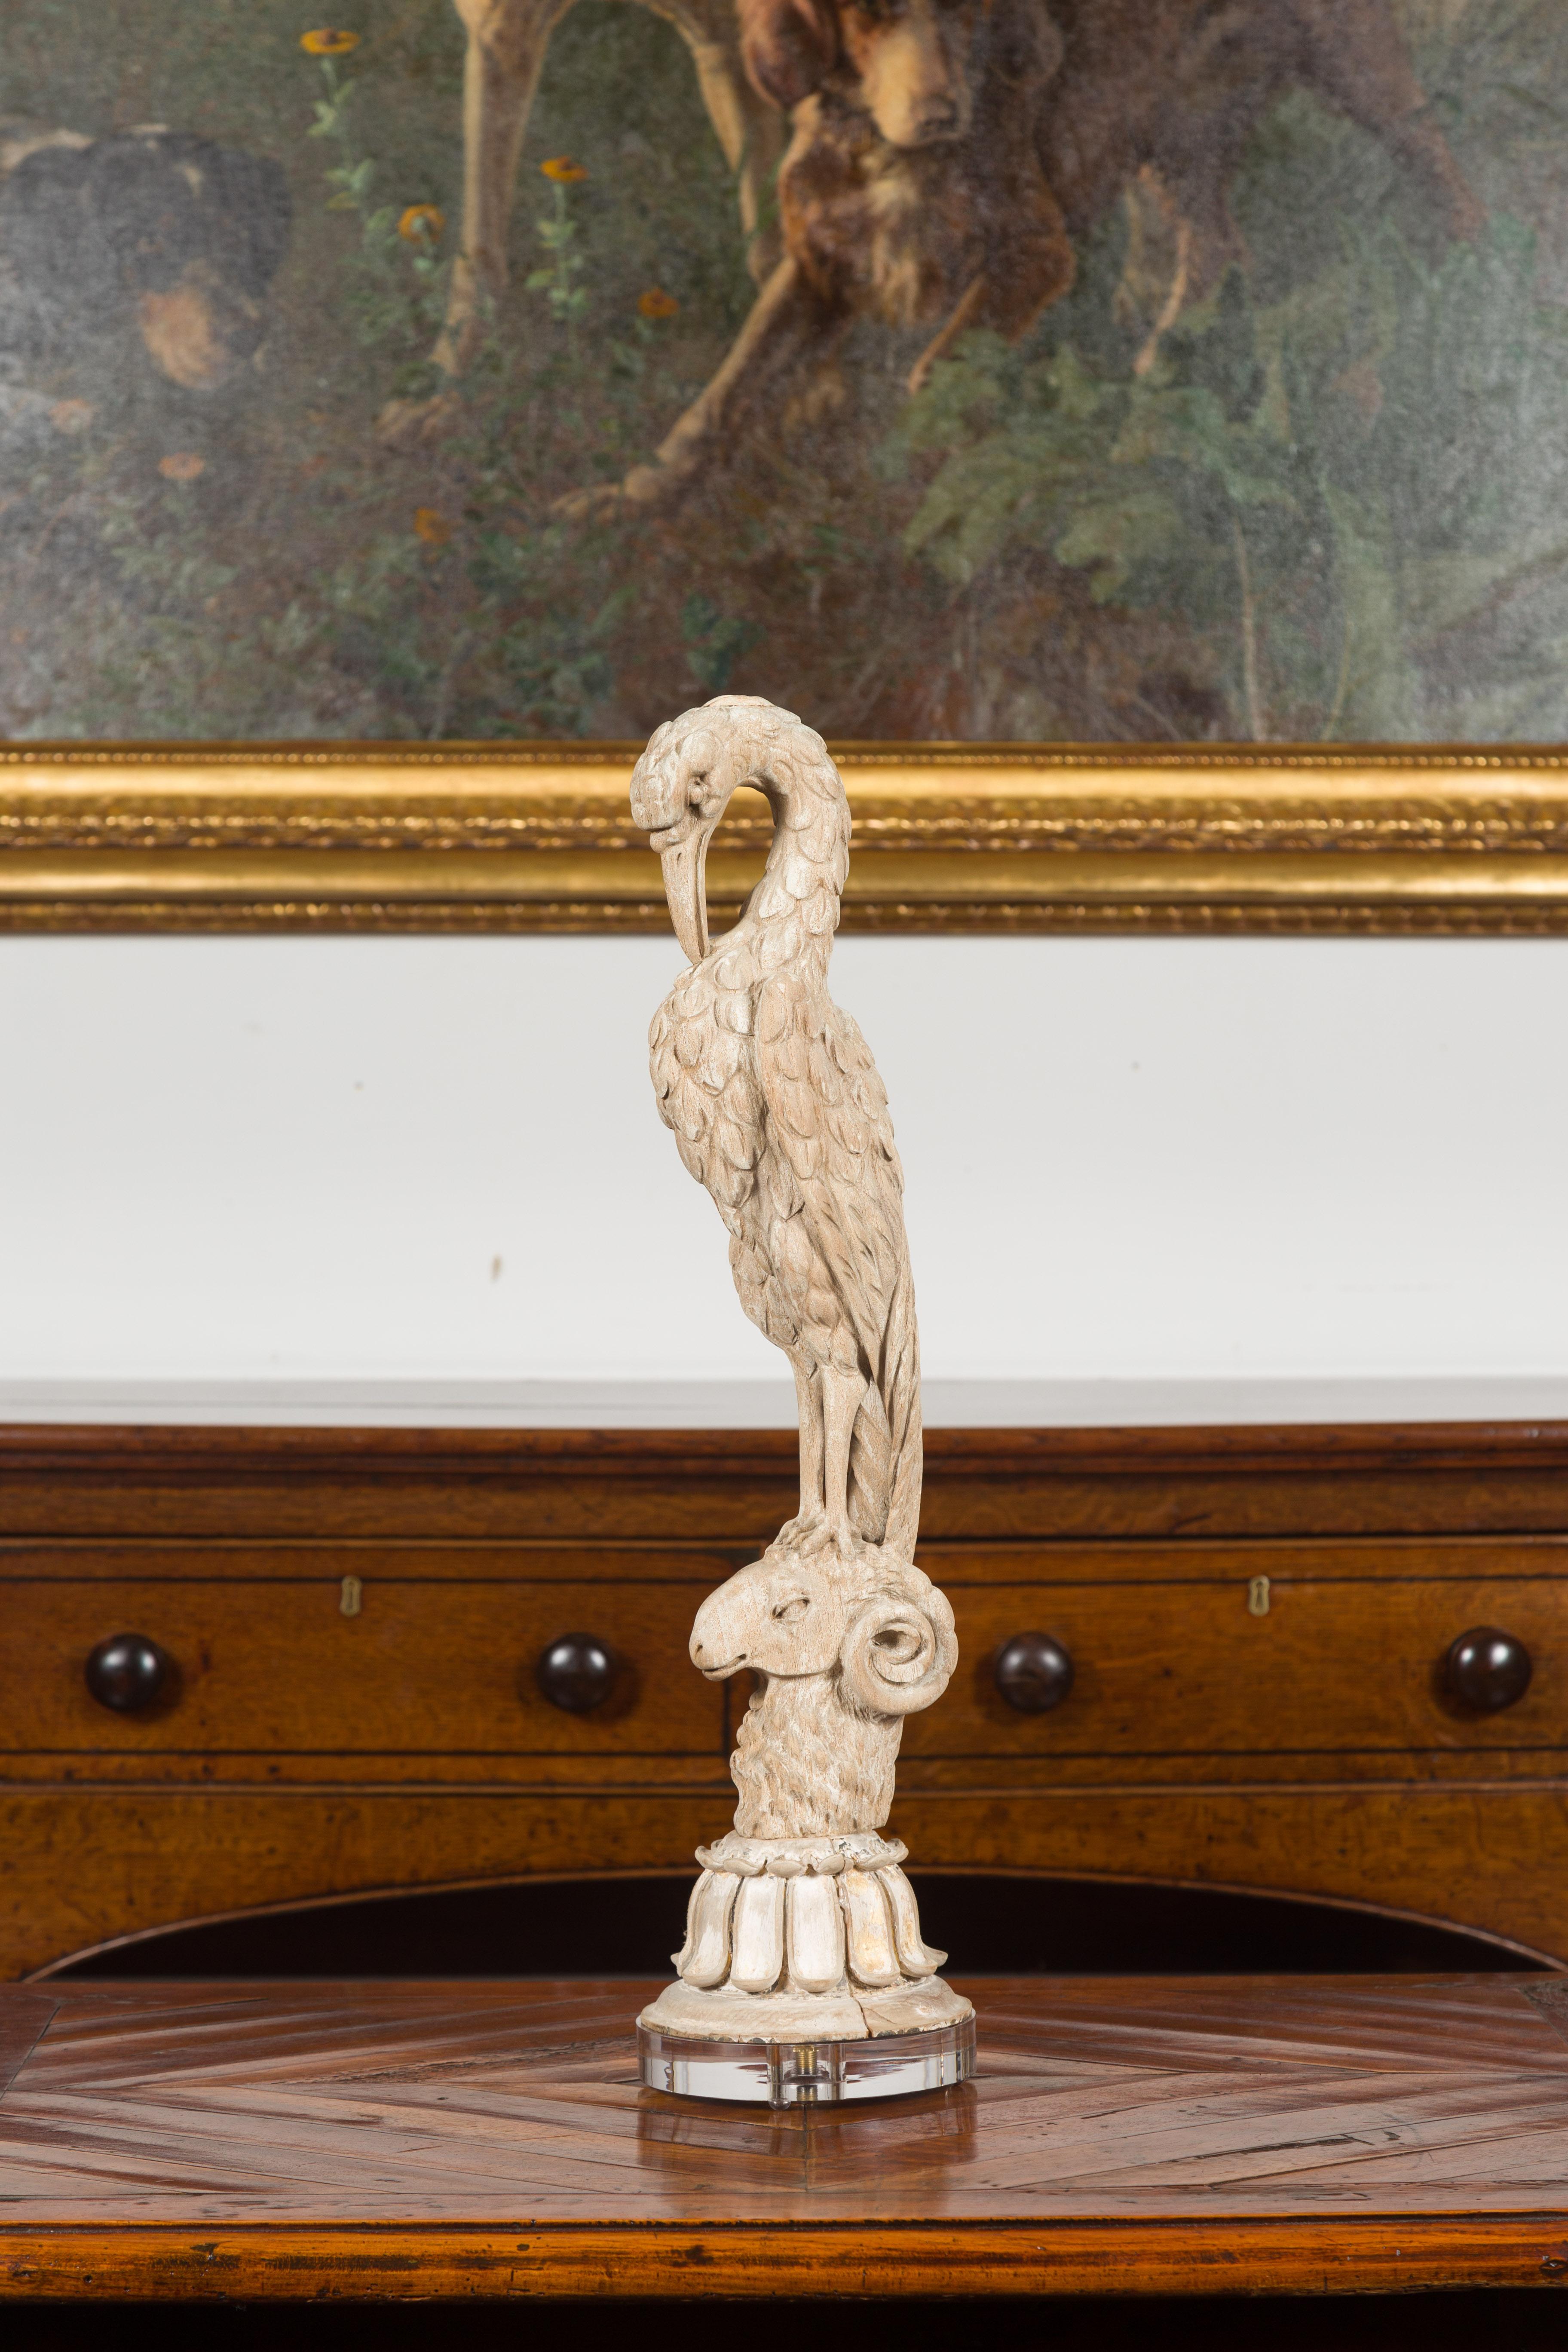 An Italian carved wooden bird on ram's head fragment from the 19th century, mounted on custom Lucite base. Created in Italy during the 19th century, this carved wooden fragment depicts a nicely detailed bird cleaning his own plumage and resting on a